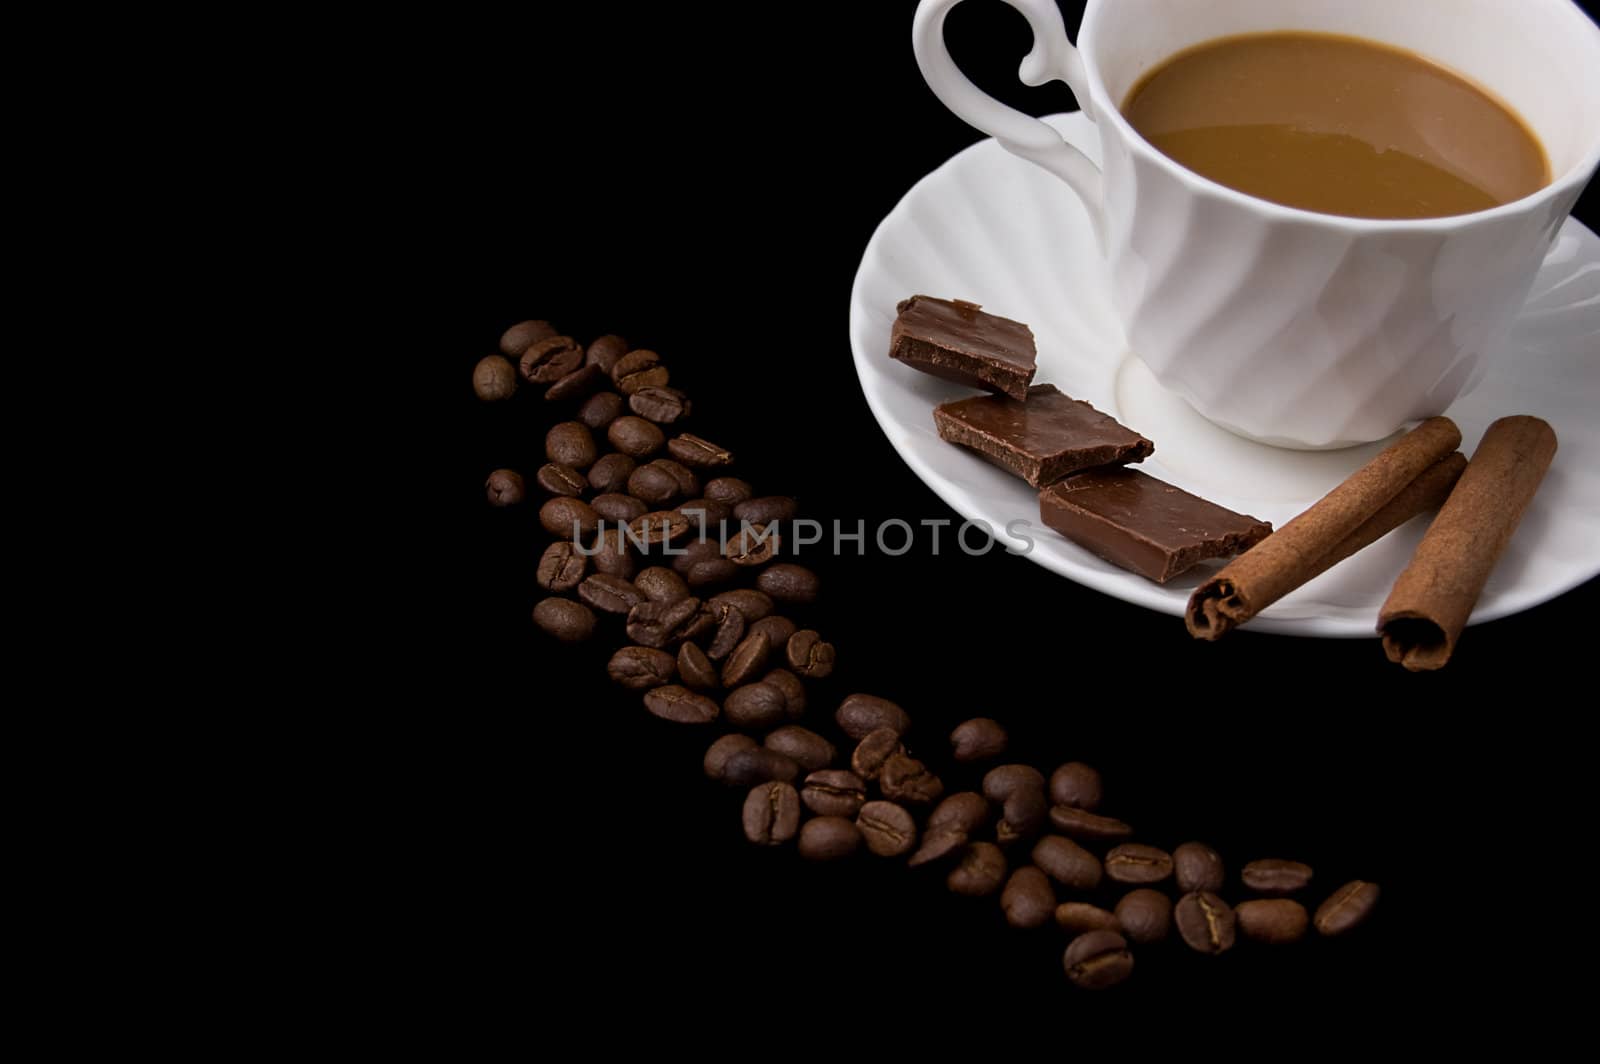 Cappuccino, coffee beans, cinnamon and chocolate by Angel_a